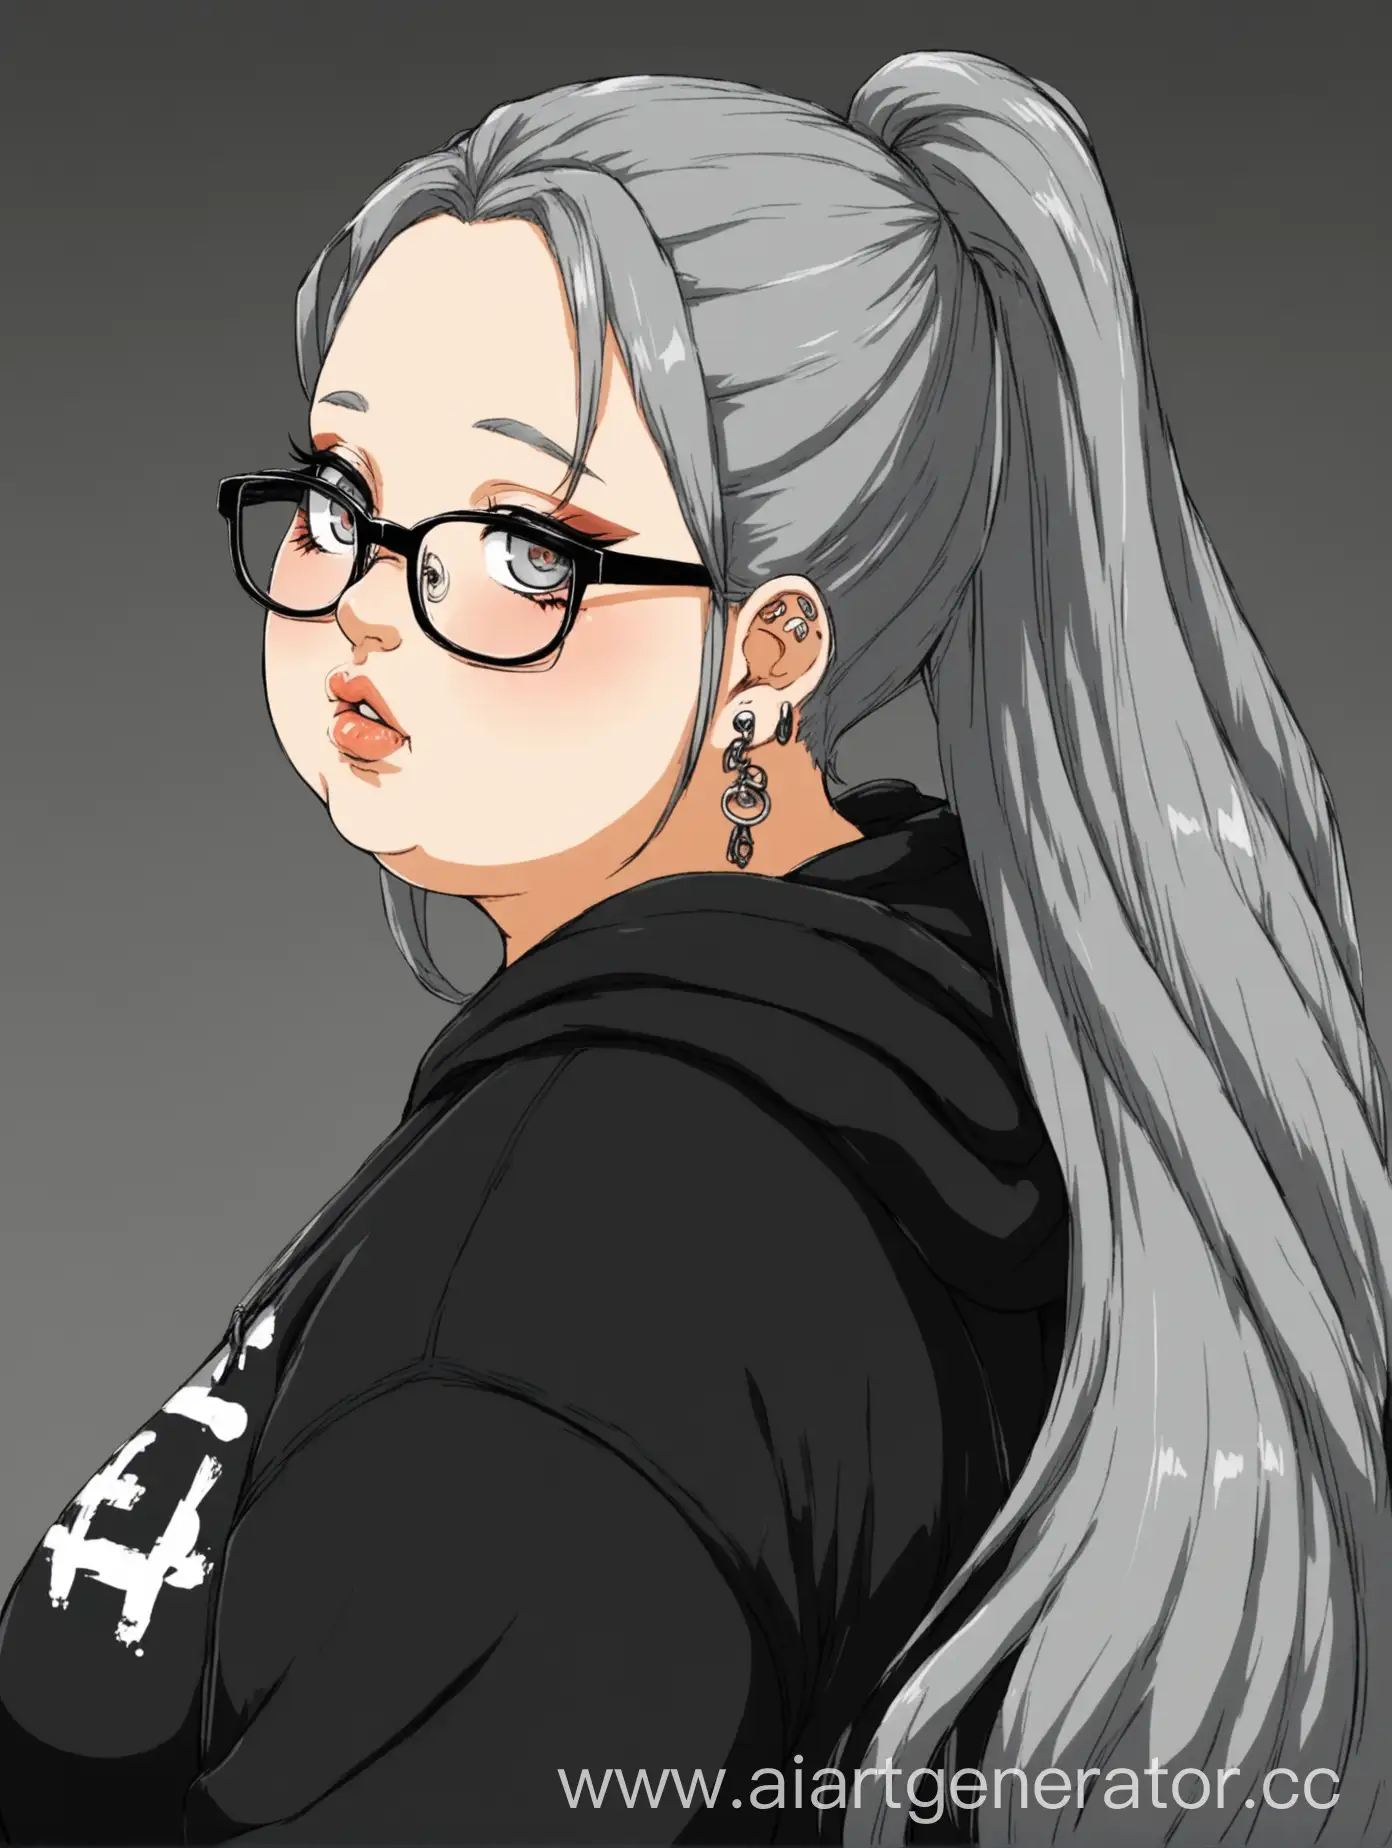 Chubby-Anime-Girl-with-Glasses-and-Piercings-in-Stylish-Black-Outfit